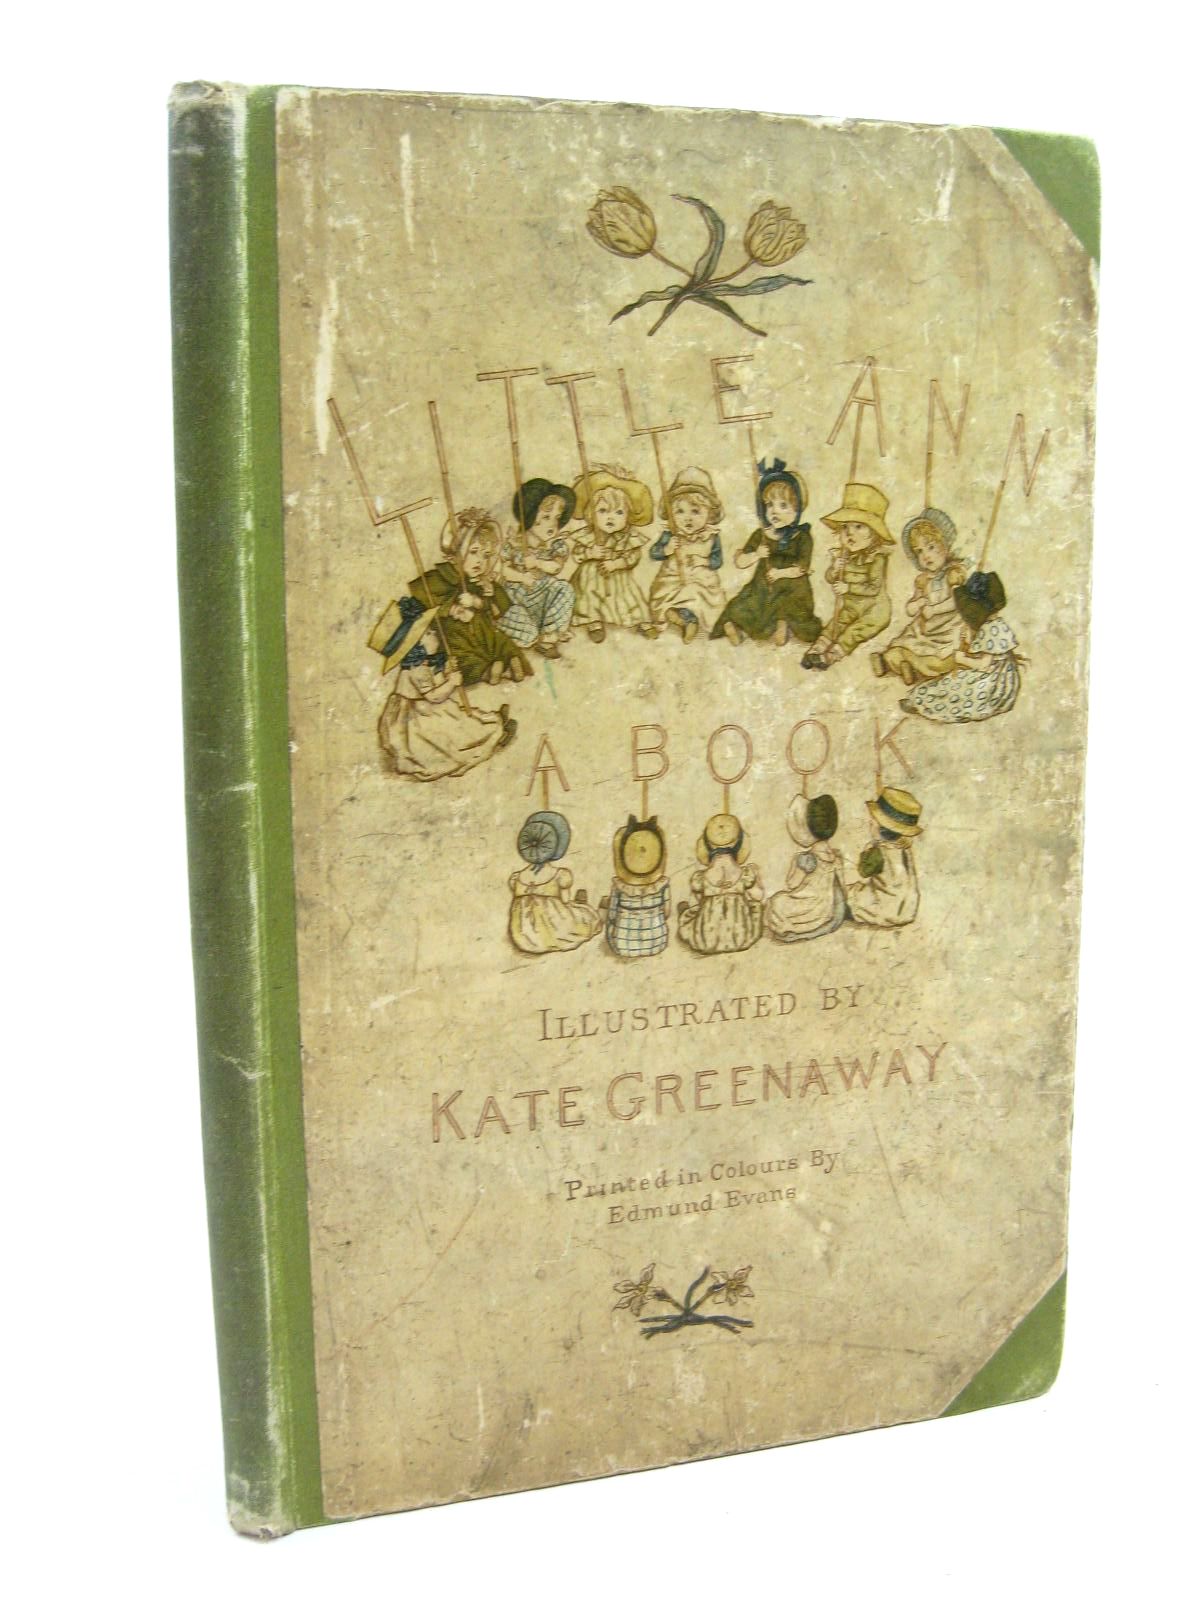 Photo of LITTLE ANN AND OTHER POEMS written by Taylor, Jane
Taylor, Ann illustrated by Greenaway, Kate published by George Routledge & Sons (STOCK CODE: 1506651)  for sale by Stella & Rose's Books